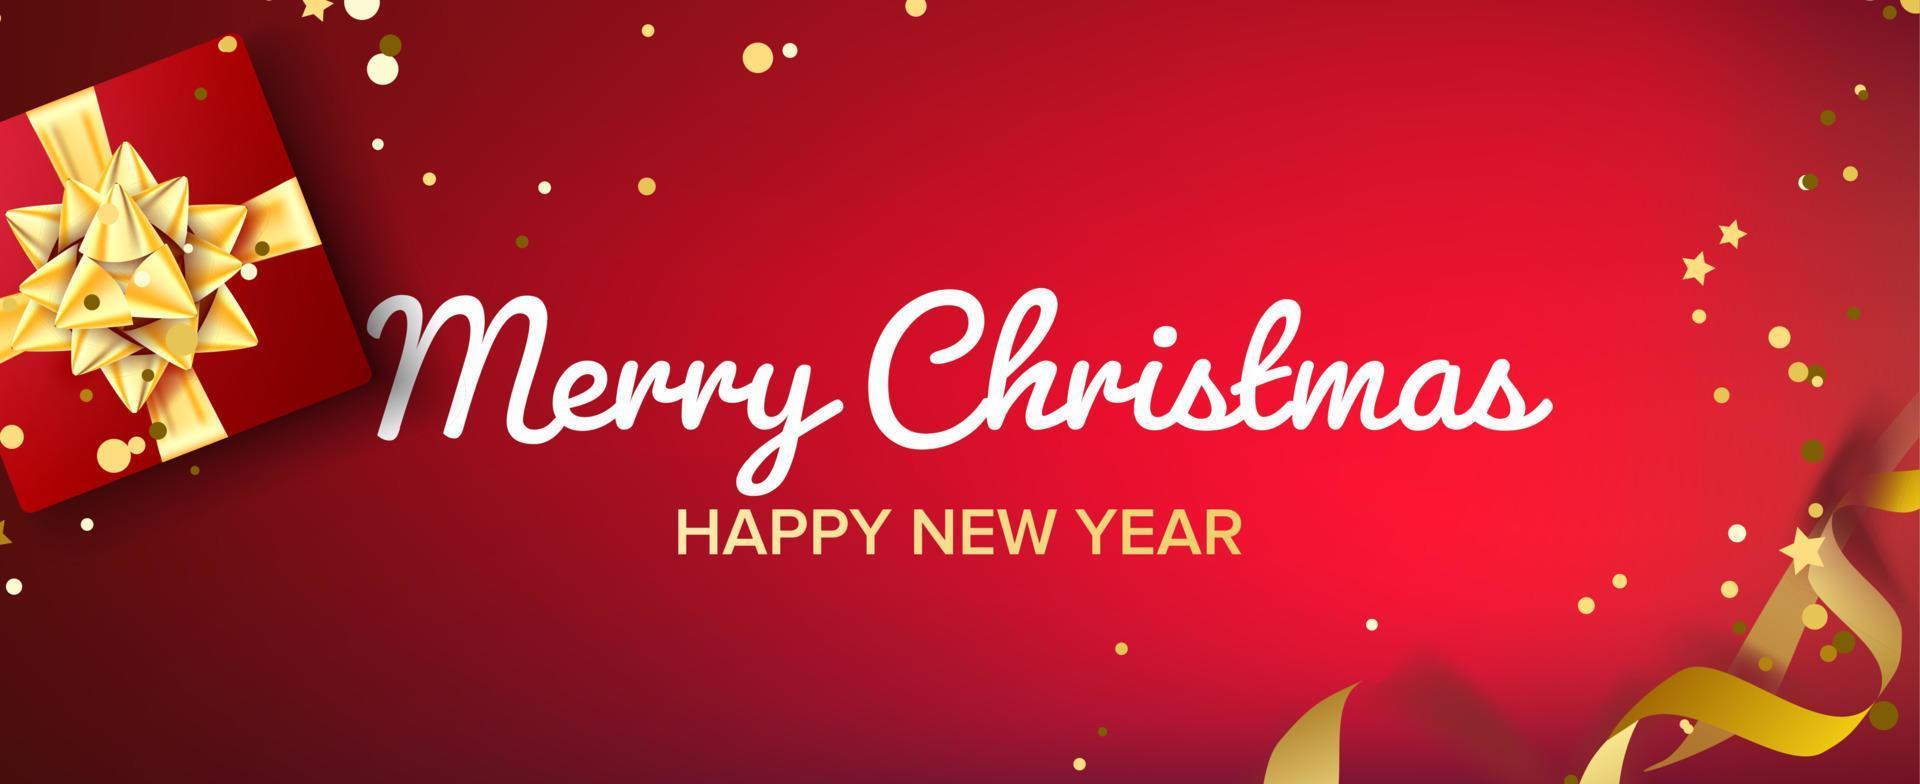 Merry Christmas Banner Vector. Gifts Box With Gold Bow. Red Horizontal Background Illustration vector